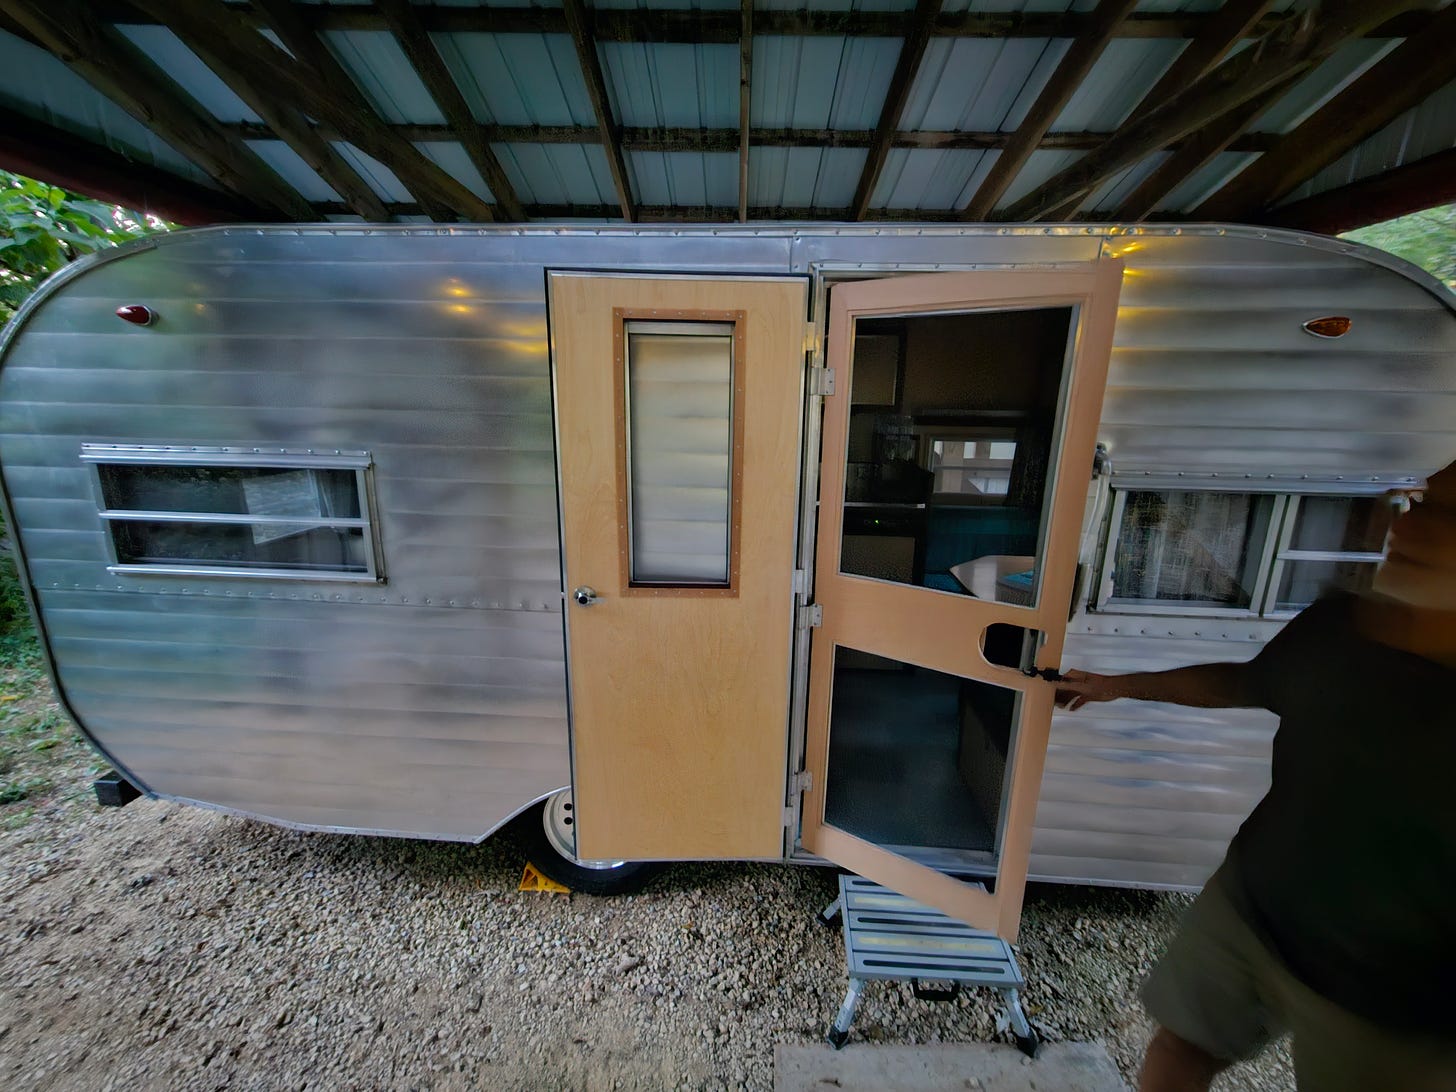 A silver metal, canned-ham-style camper trailer has a lovely wooden screen door that's being opened by an older white man with a silver beard.